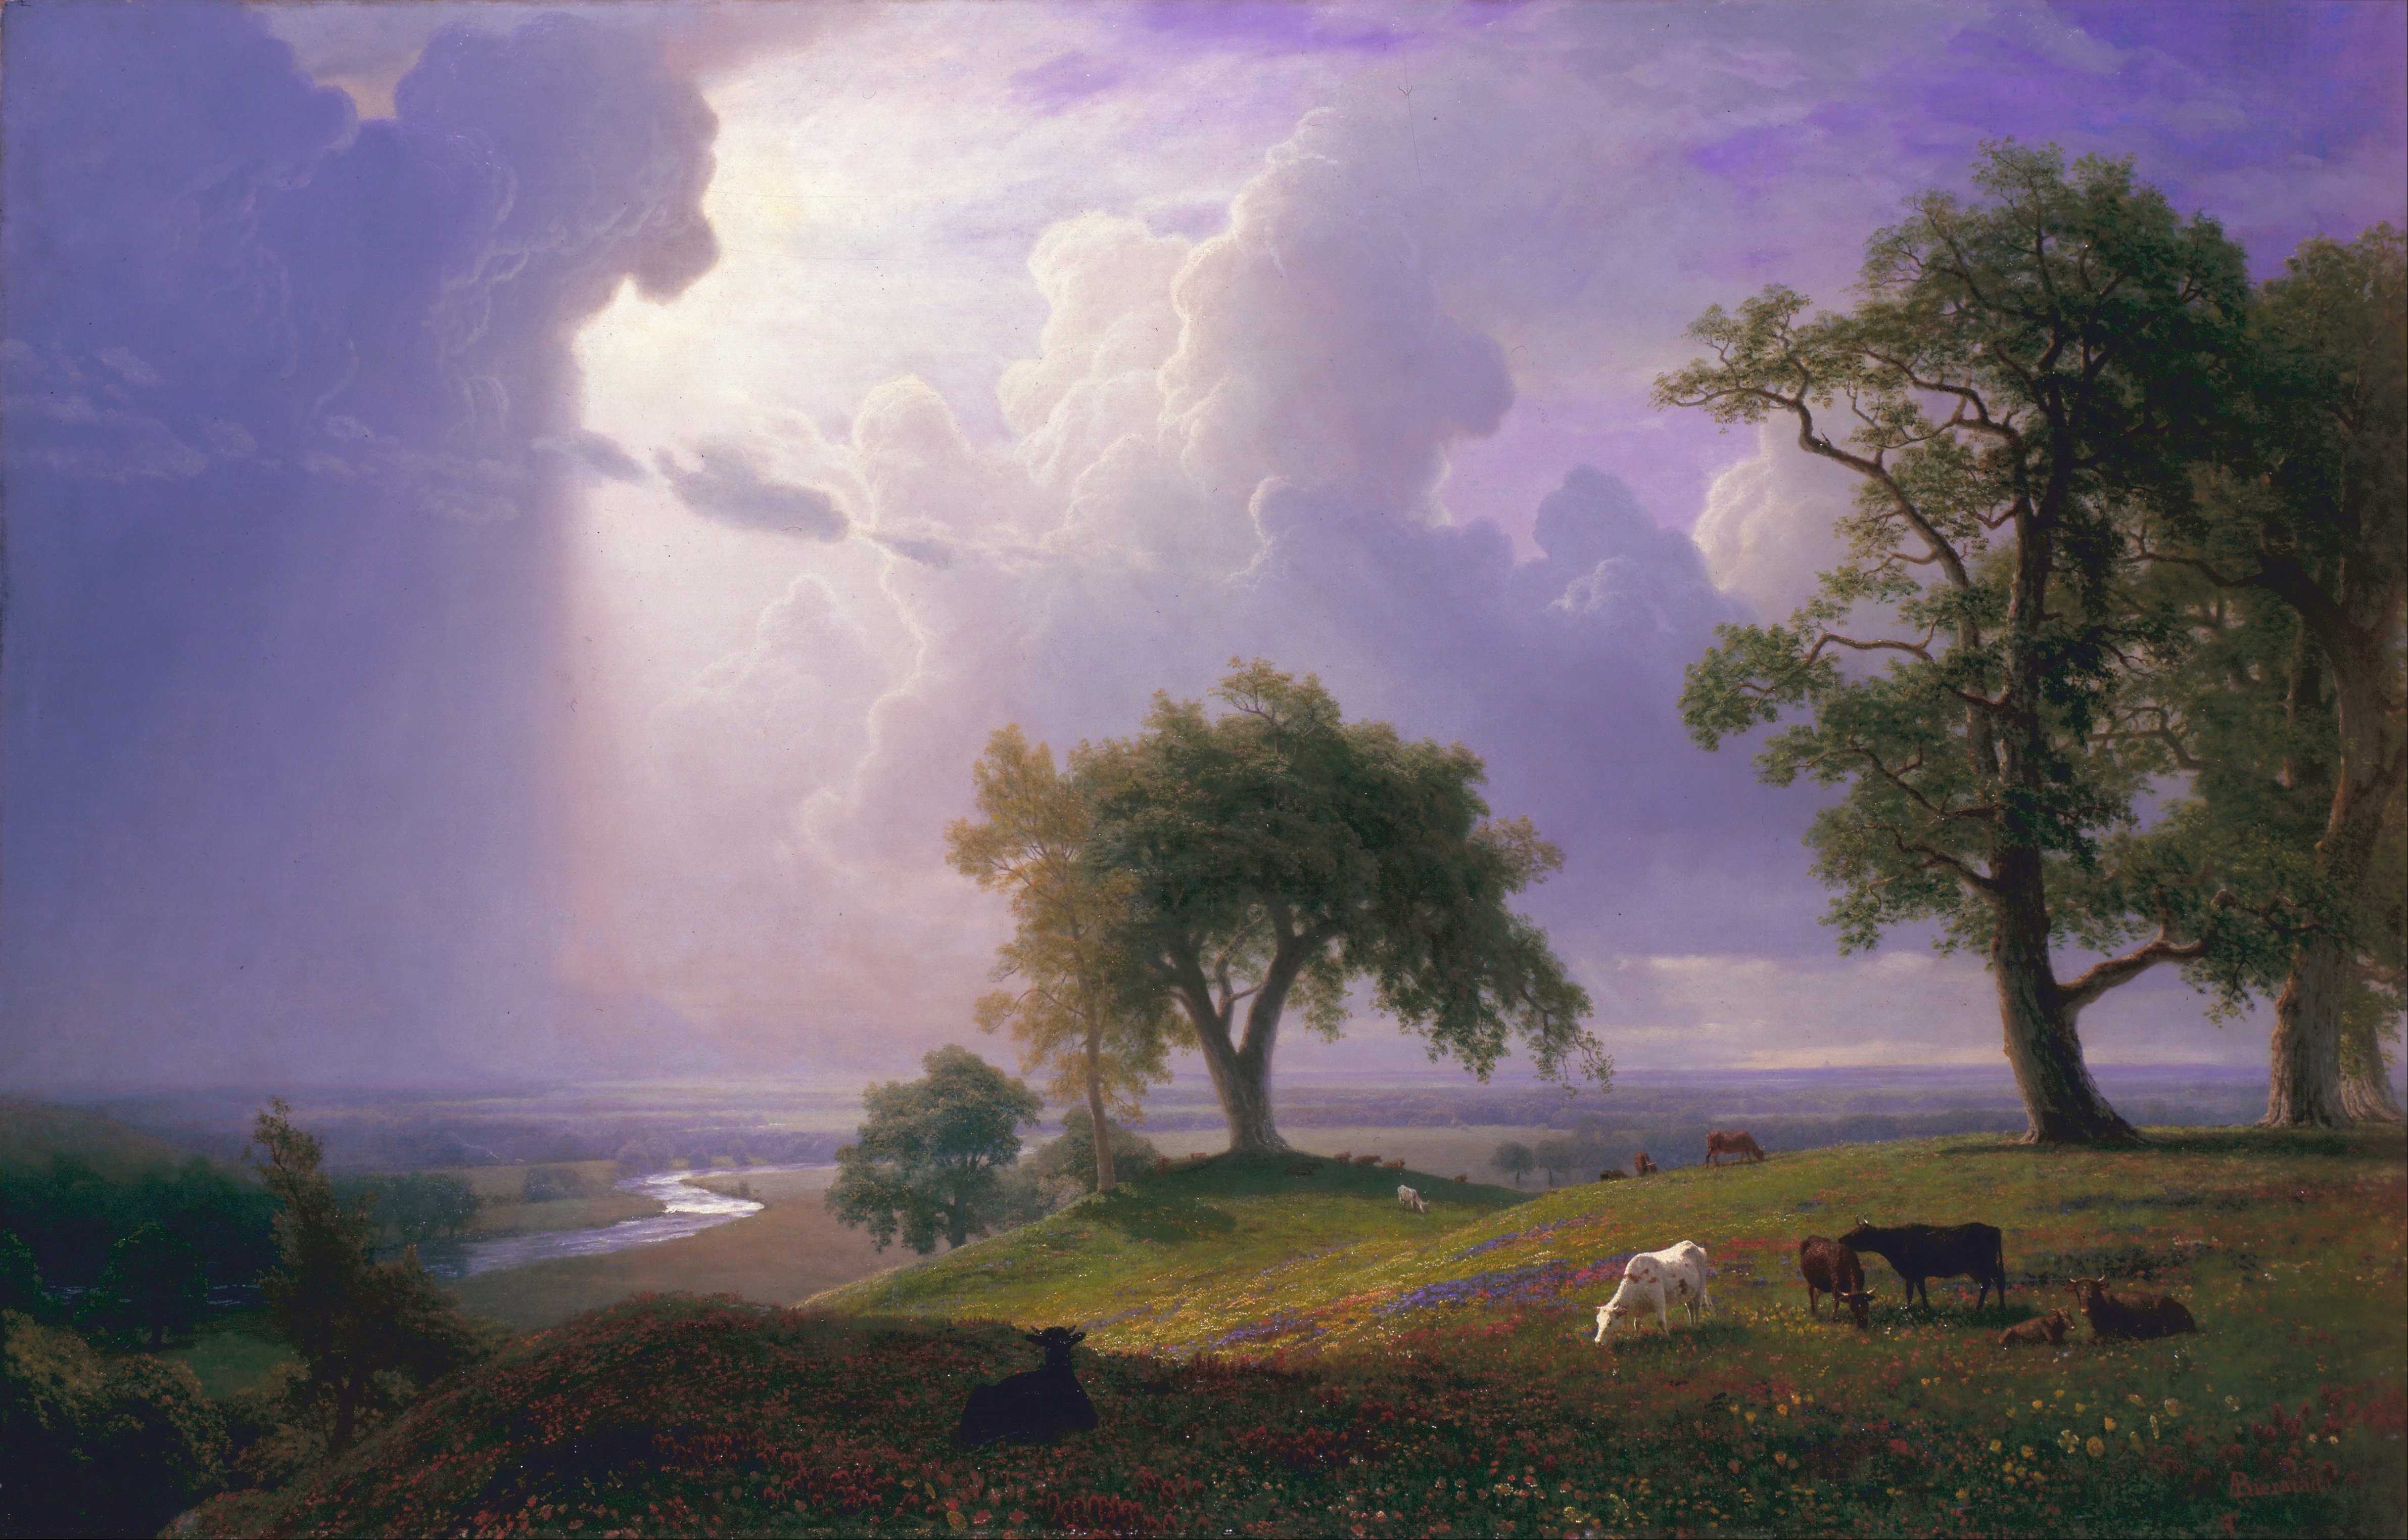 Find out more about Albert Bierstadt - California Spring